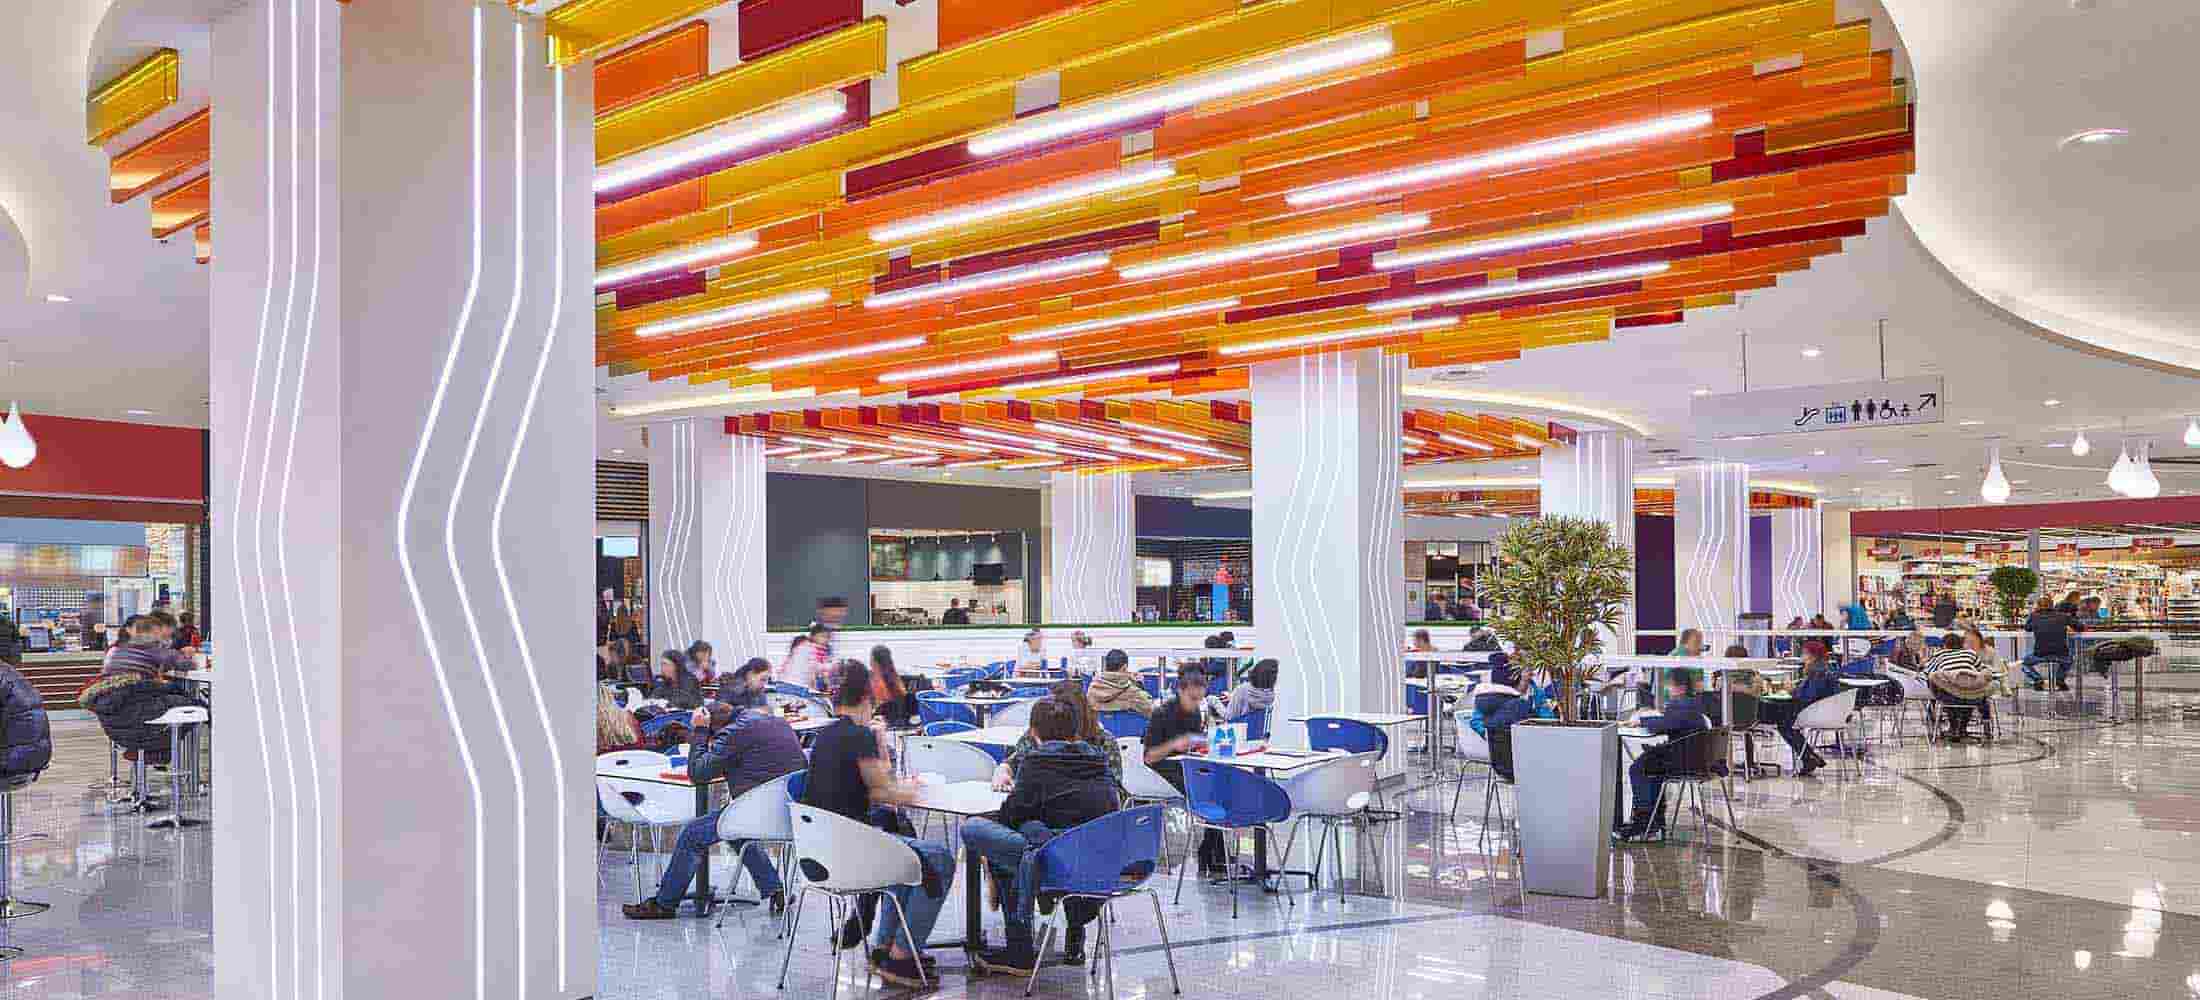 Food court in Moscow shopping mall